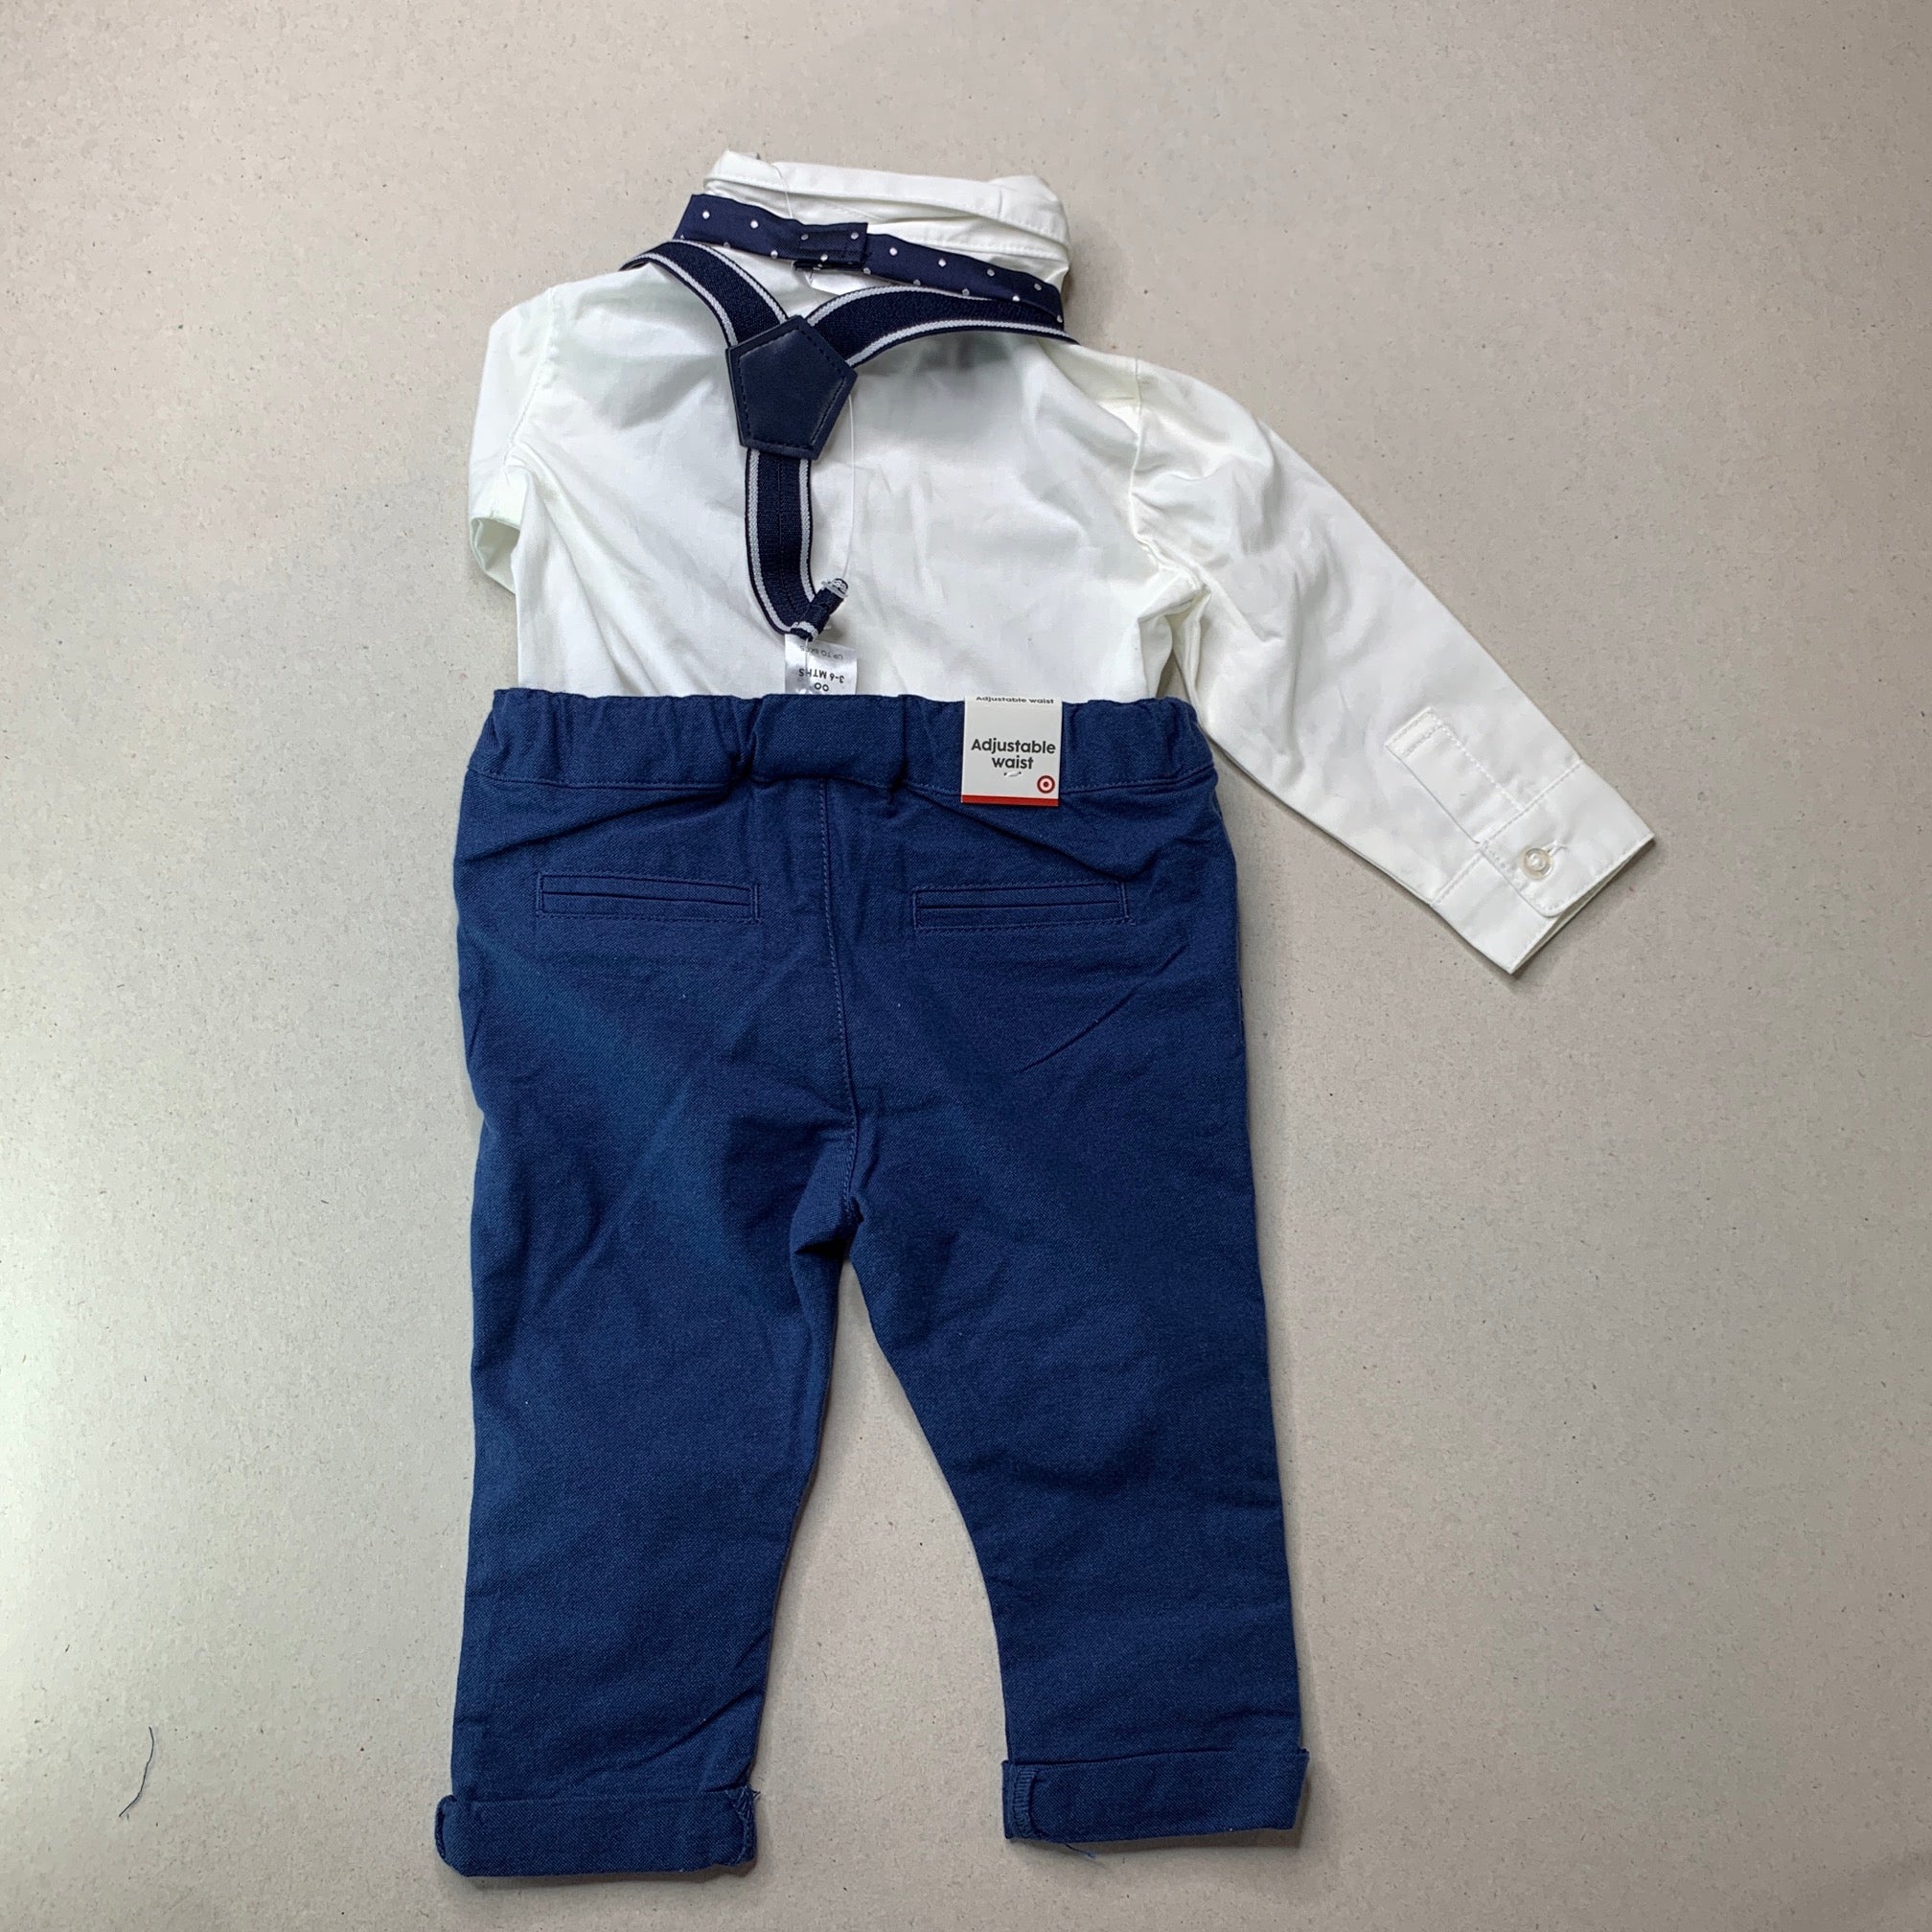 Boys Formal Suit Set, Shirt with Slim Vest and Pants – Yara clothing nz